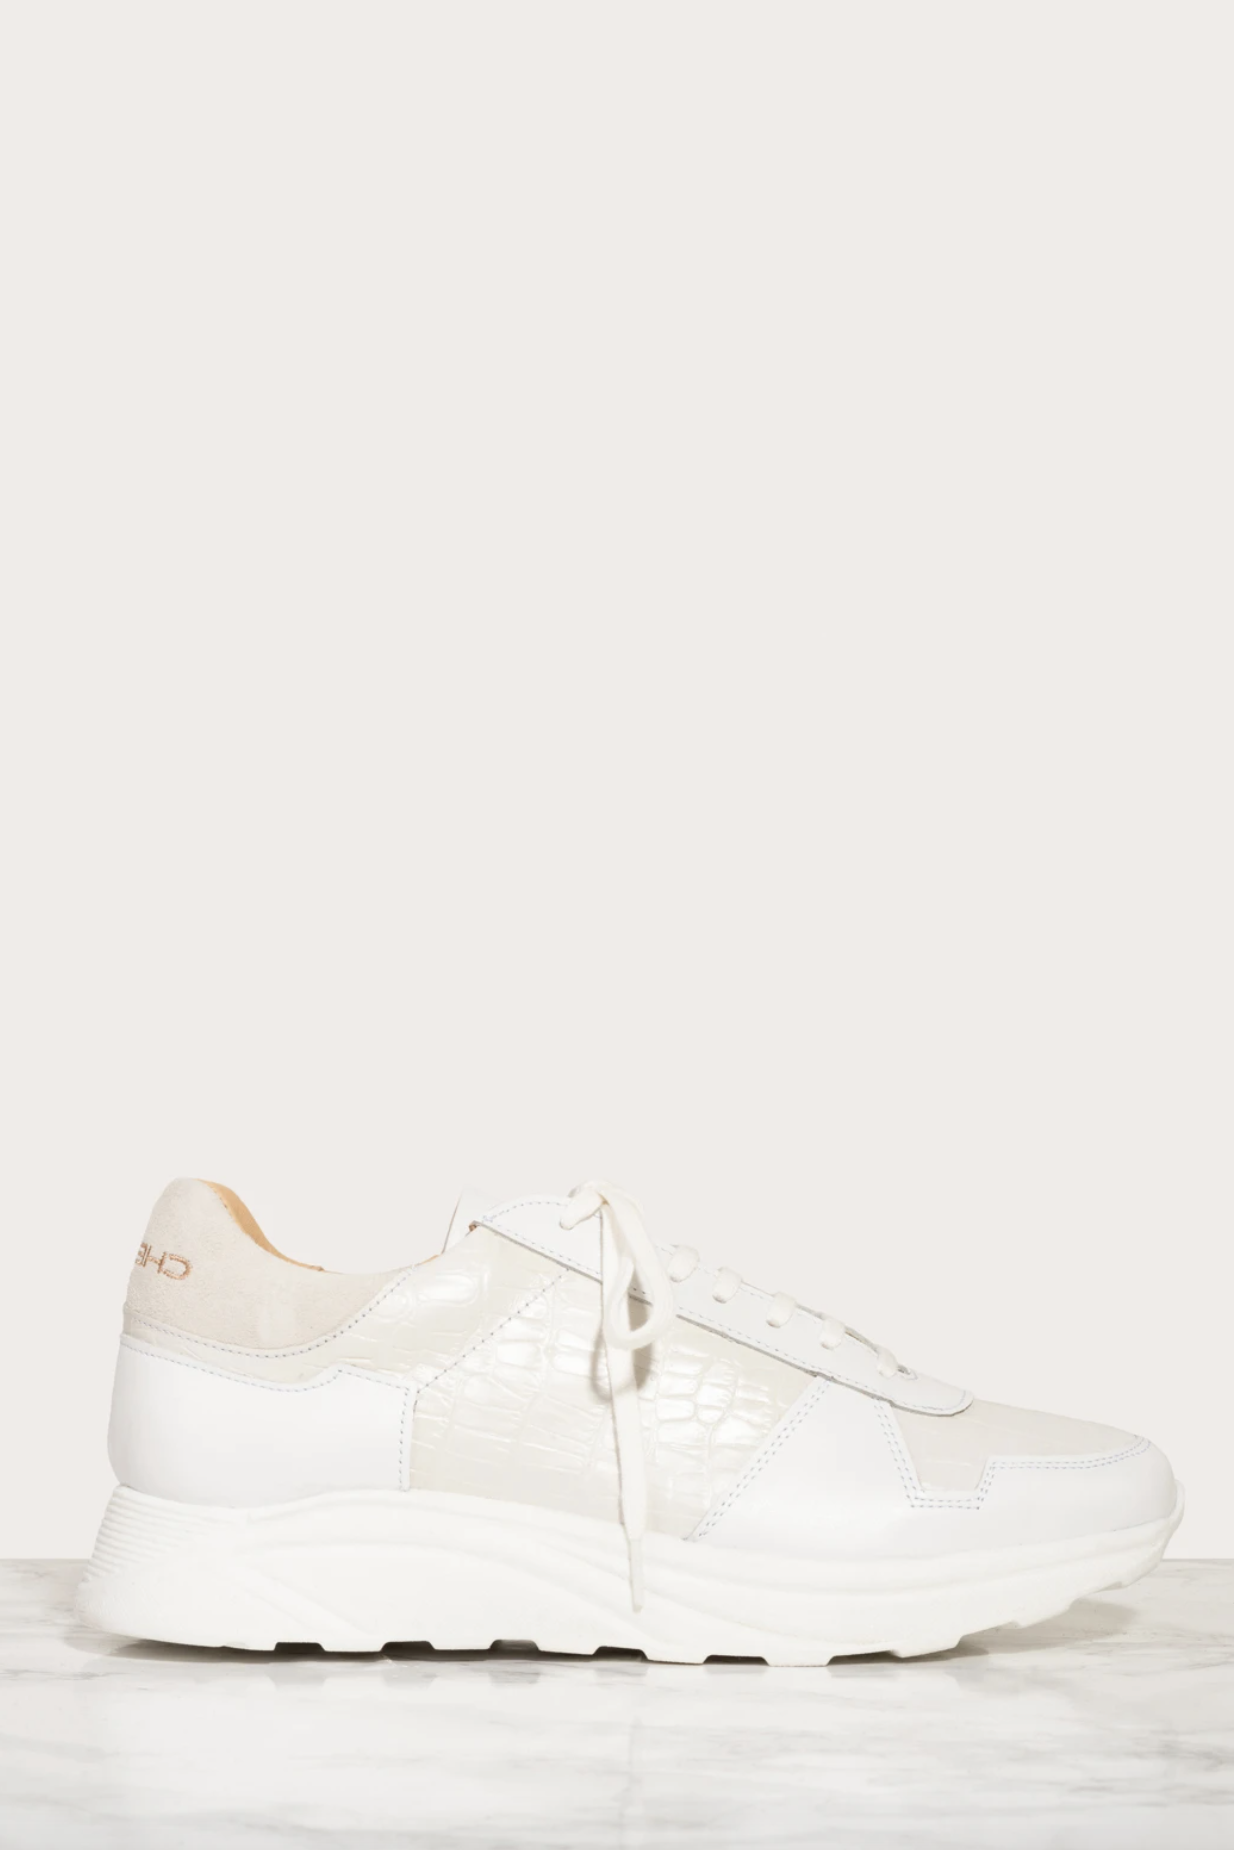 cool white shoes 219